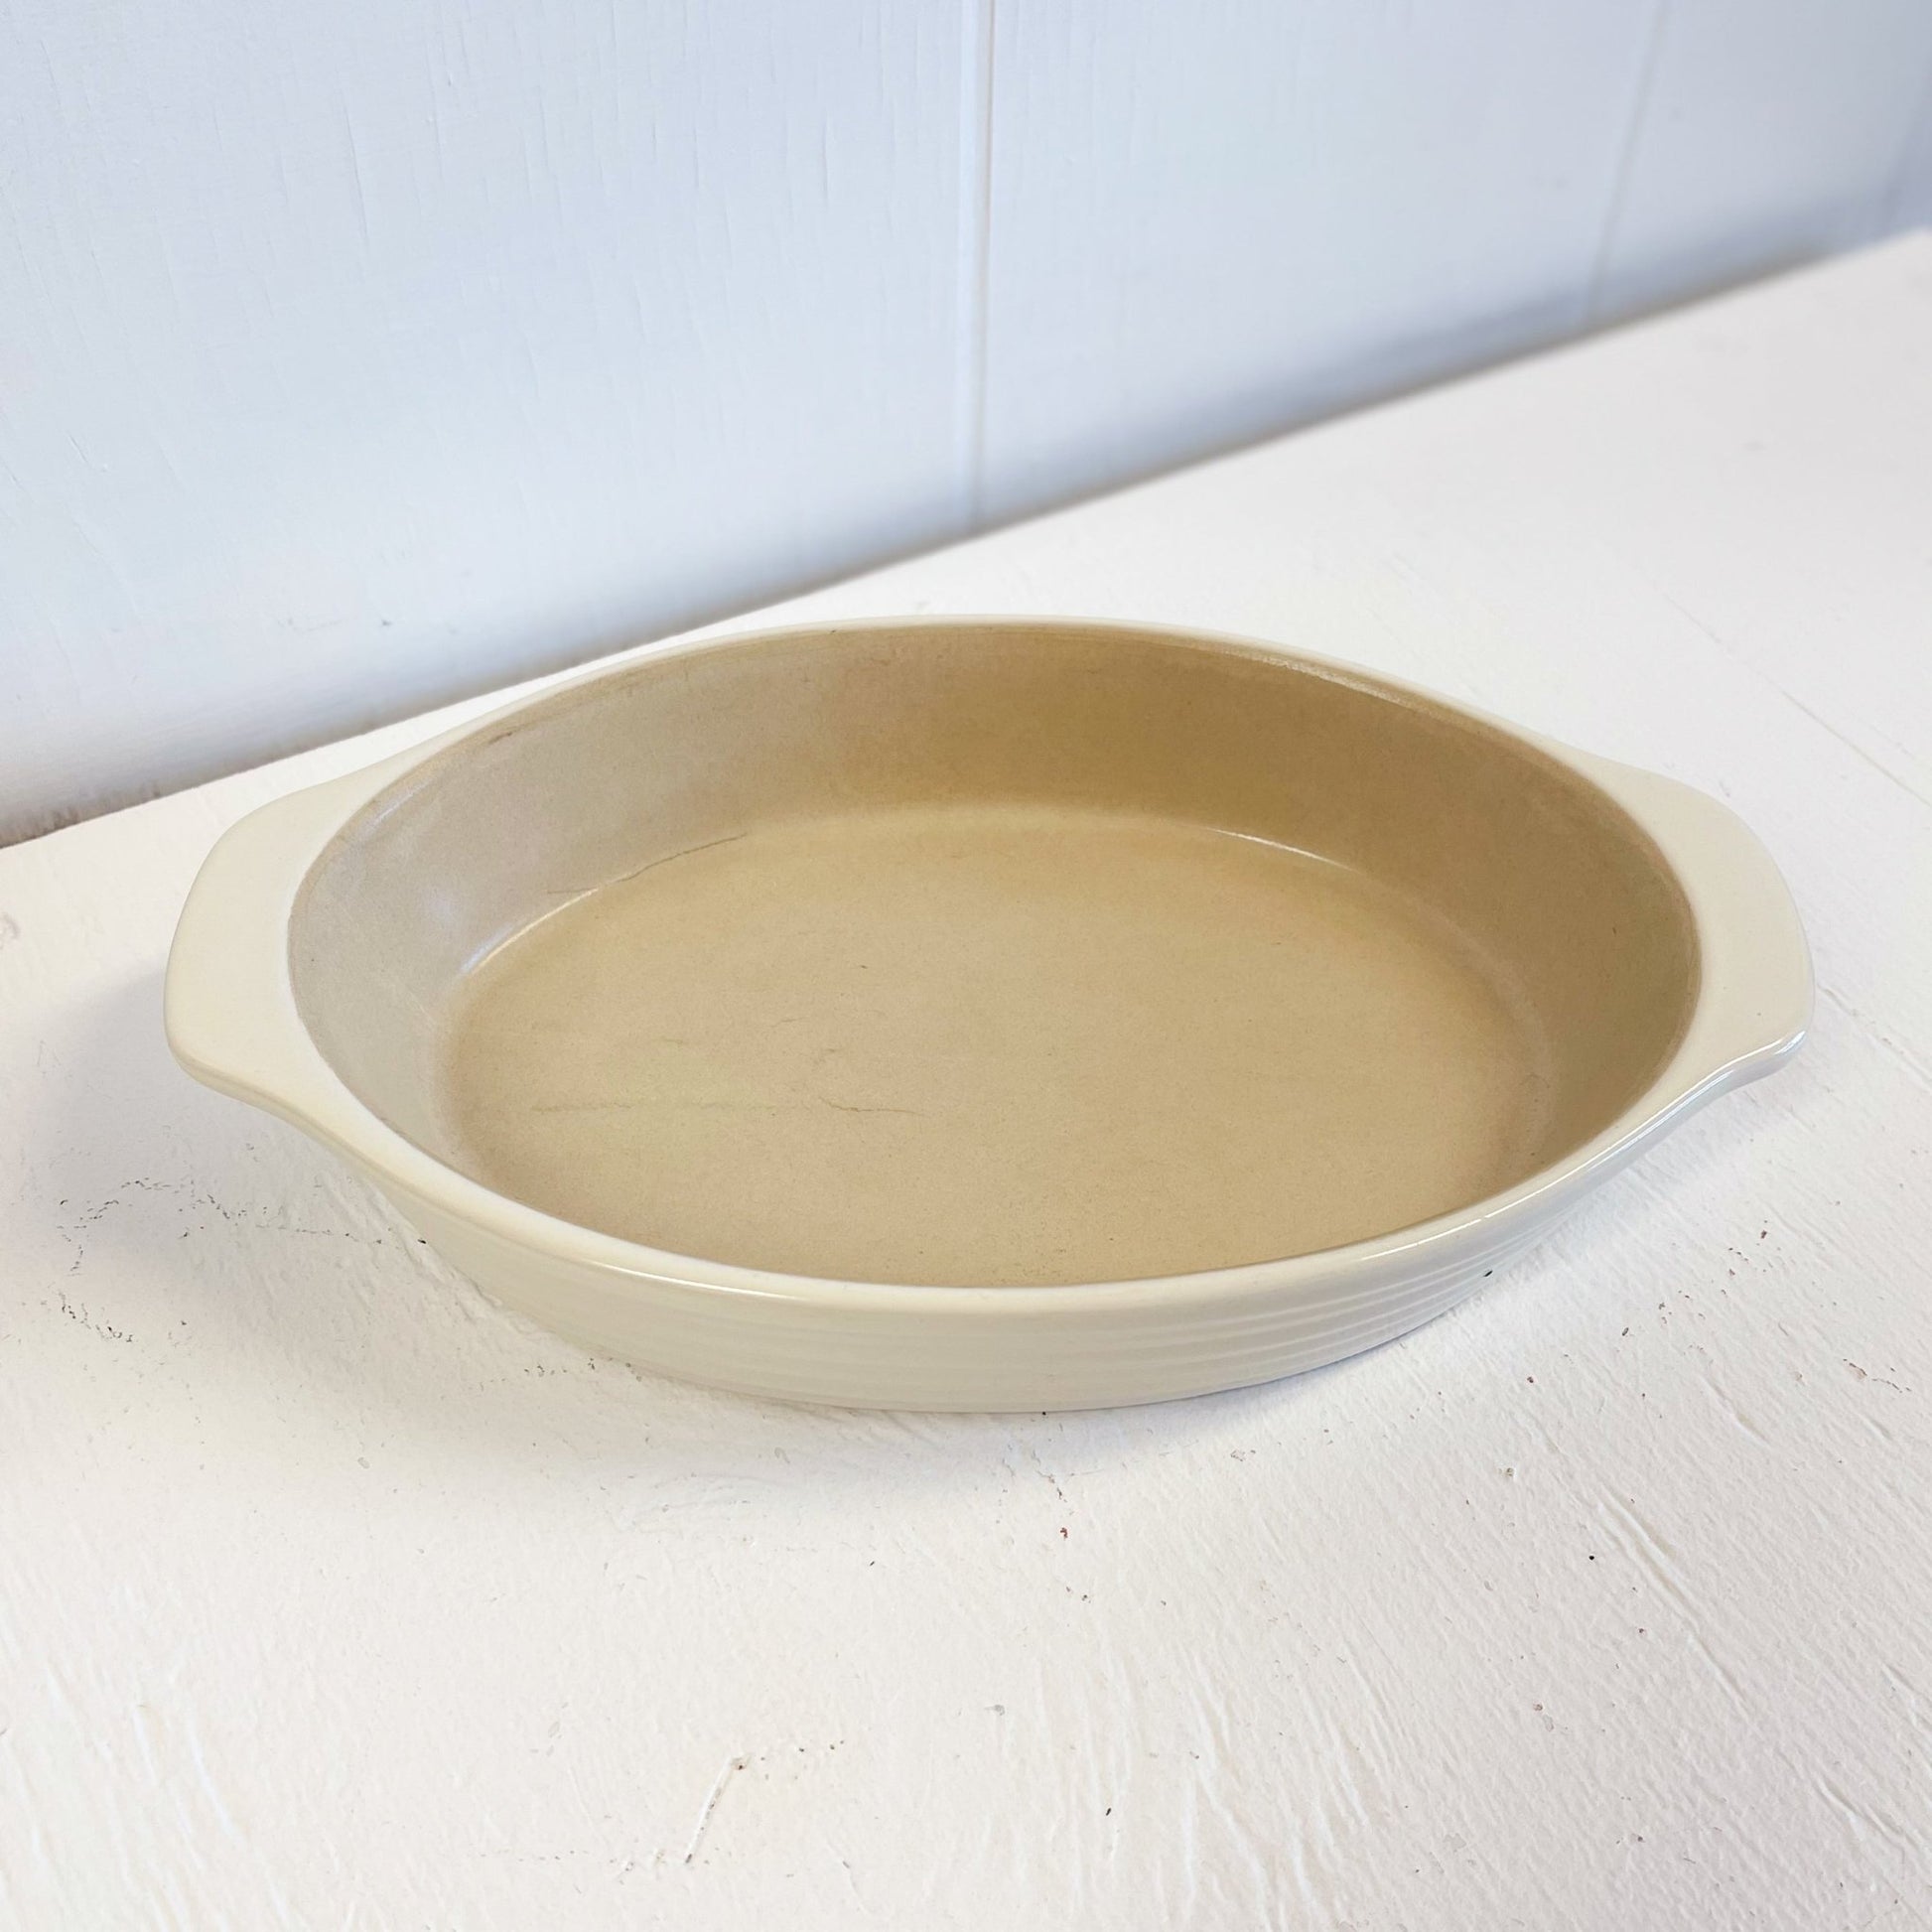 Stoneware Casserole Dish by The Pampered Chef-The Pampered Chef-Casserole Dish-Stockton Farm